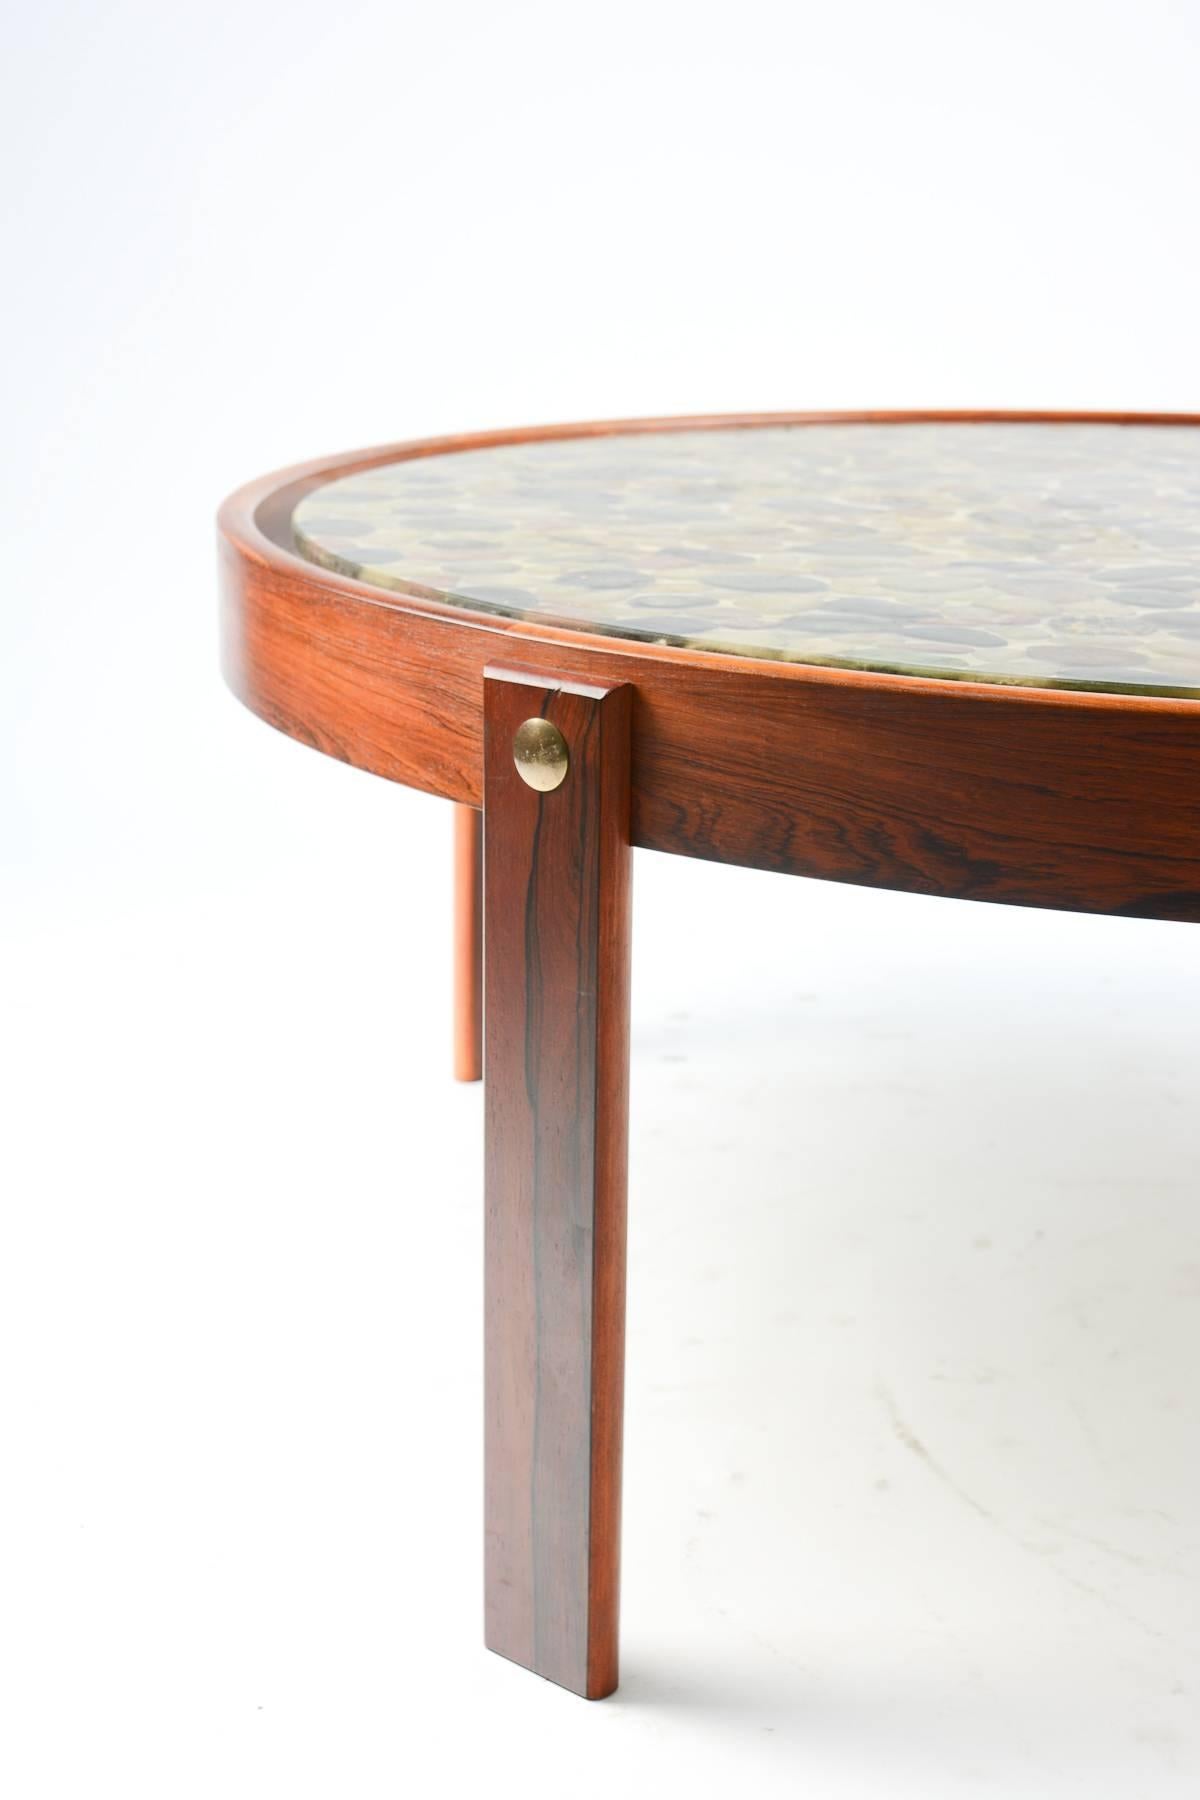 20th Century Danish Modern River Stone and Rosewood Coffee Table